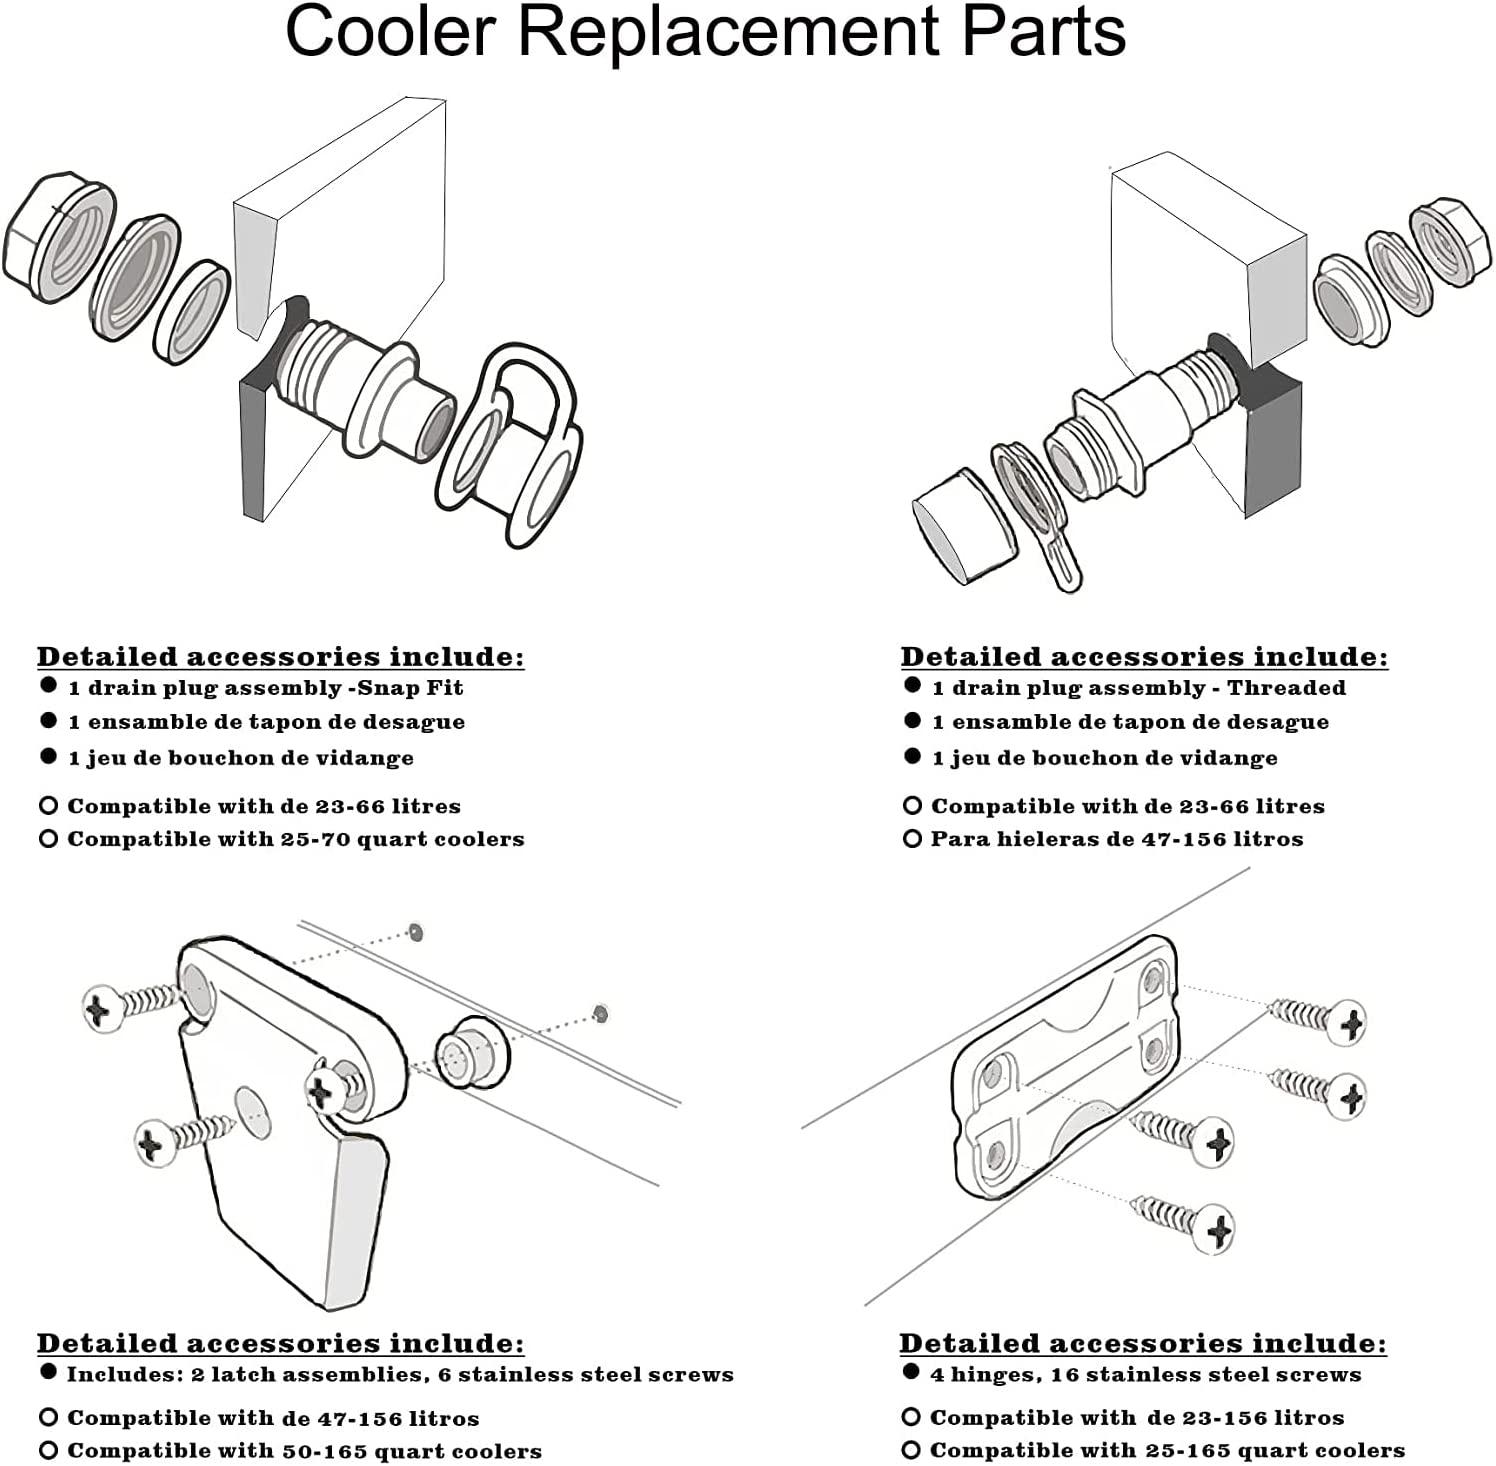 Cooler Replacement Parts